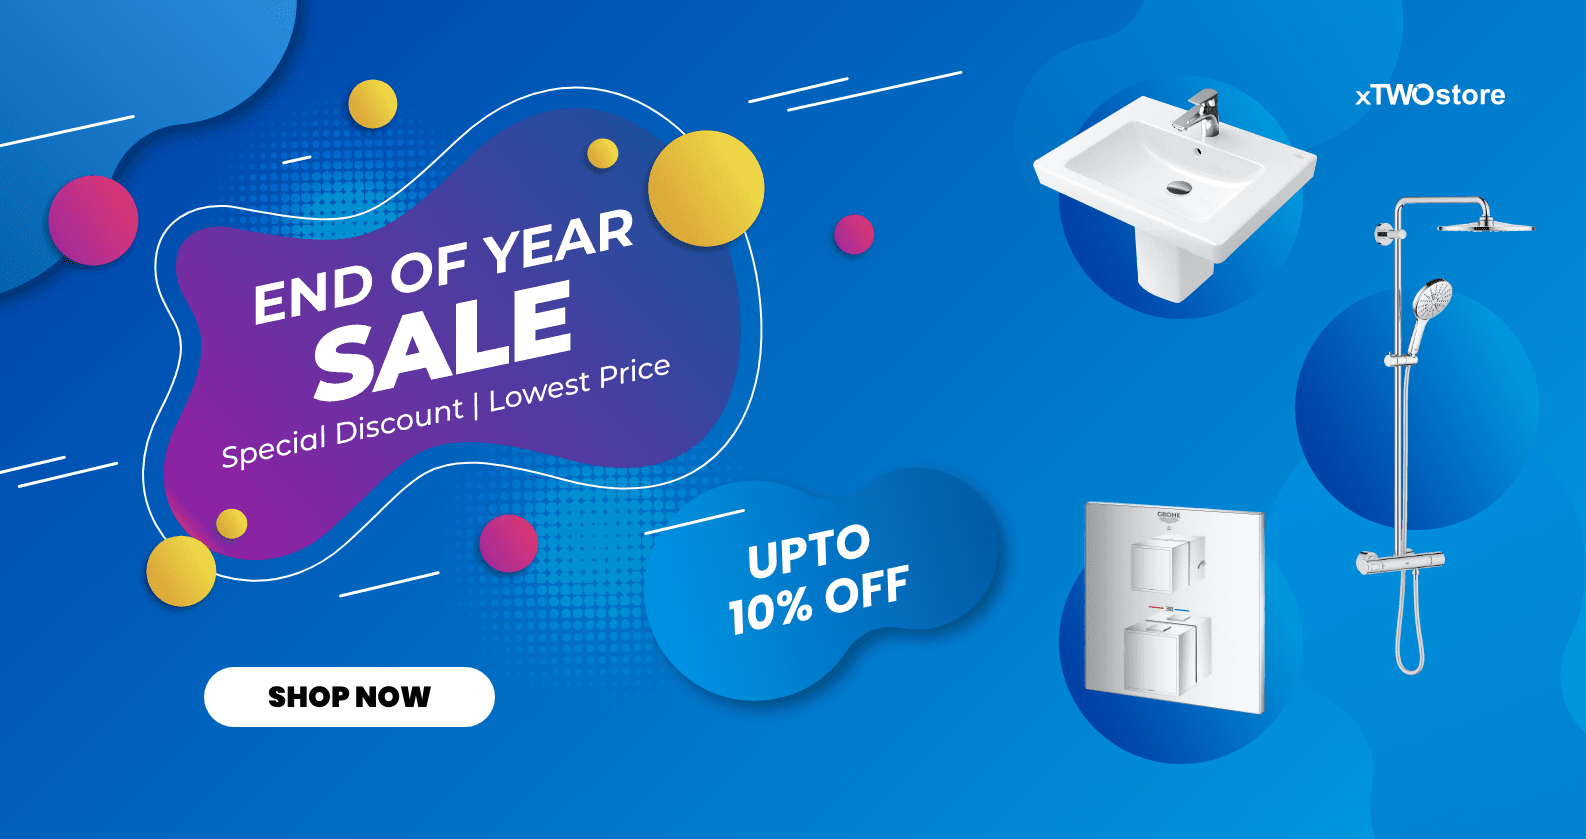 Year End Sale at xTWOstore